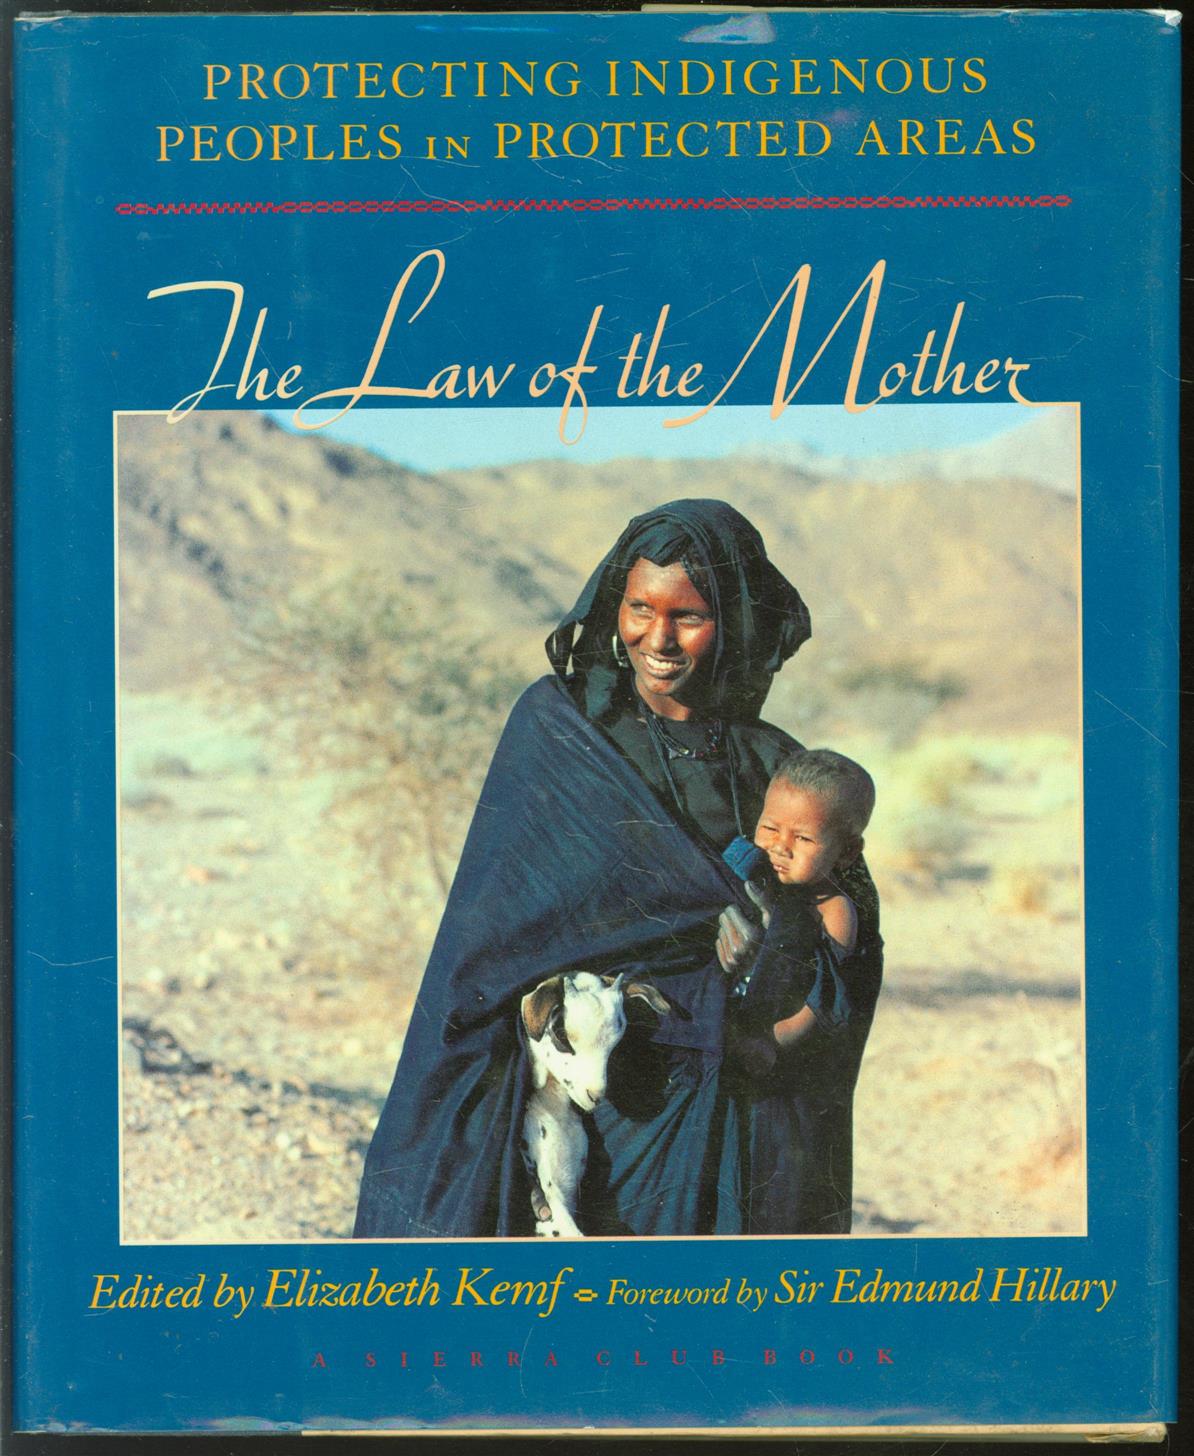 Elizabeth Kemf, Edmund Hillary - Indigenous peoples and protected areas: the law of mother